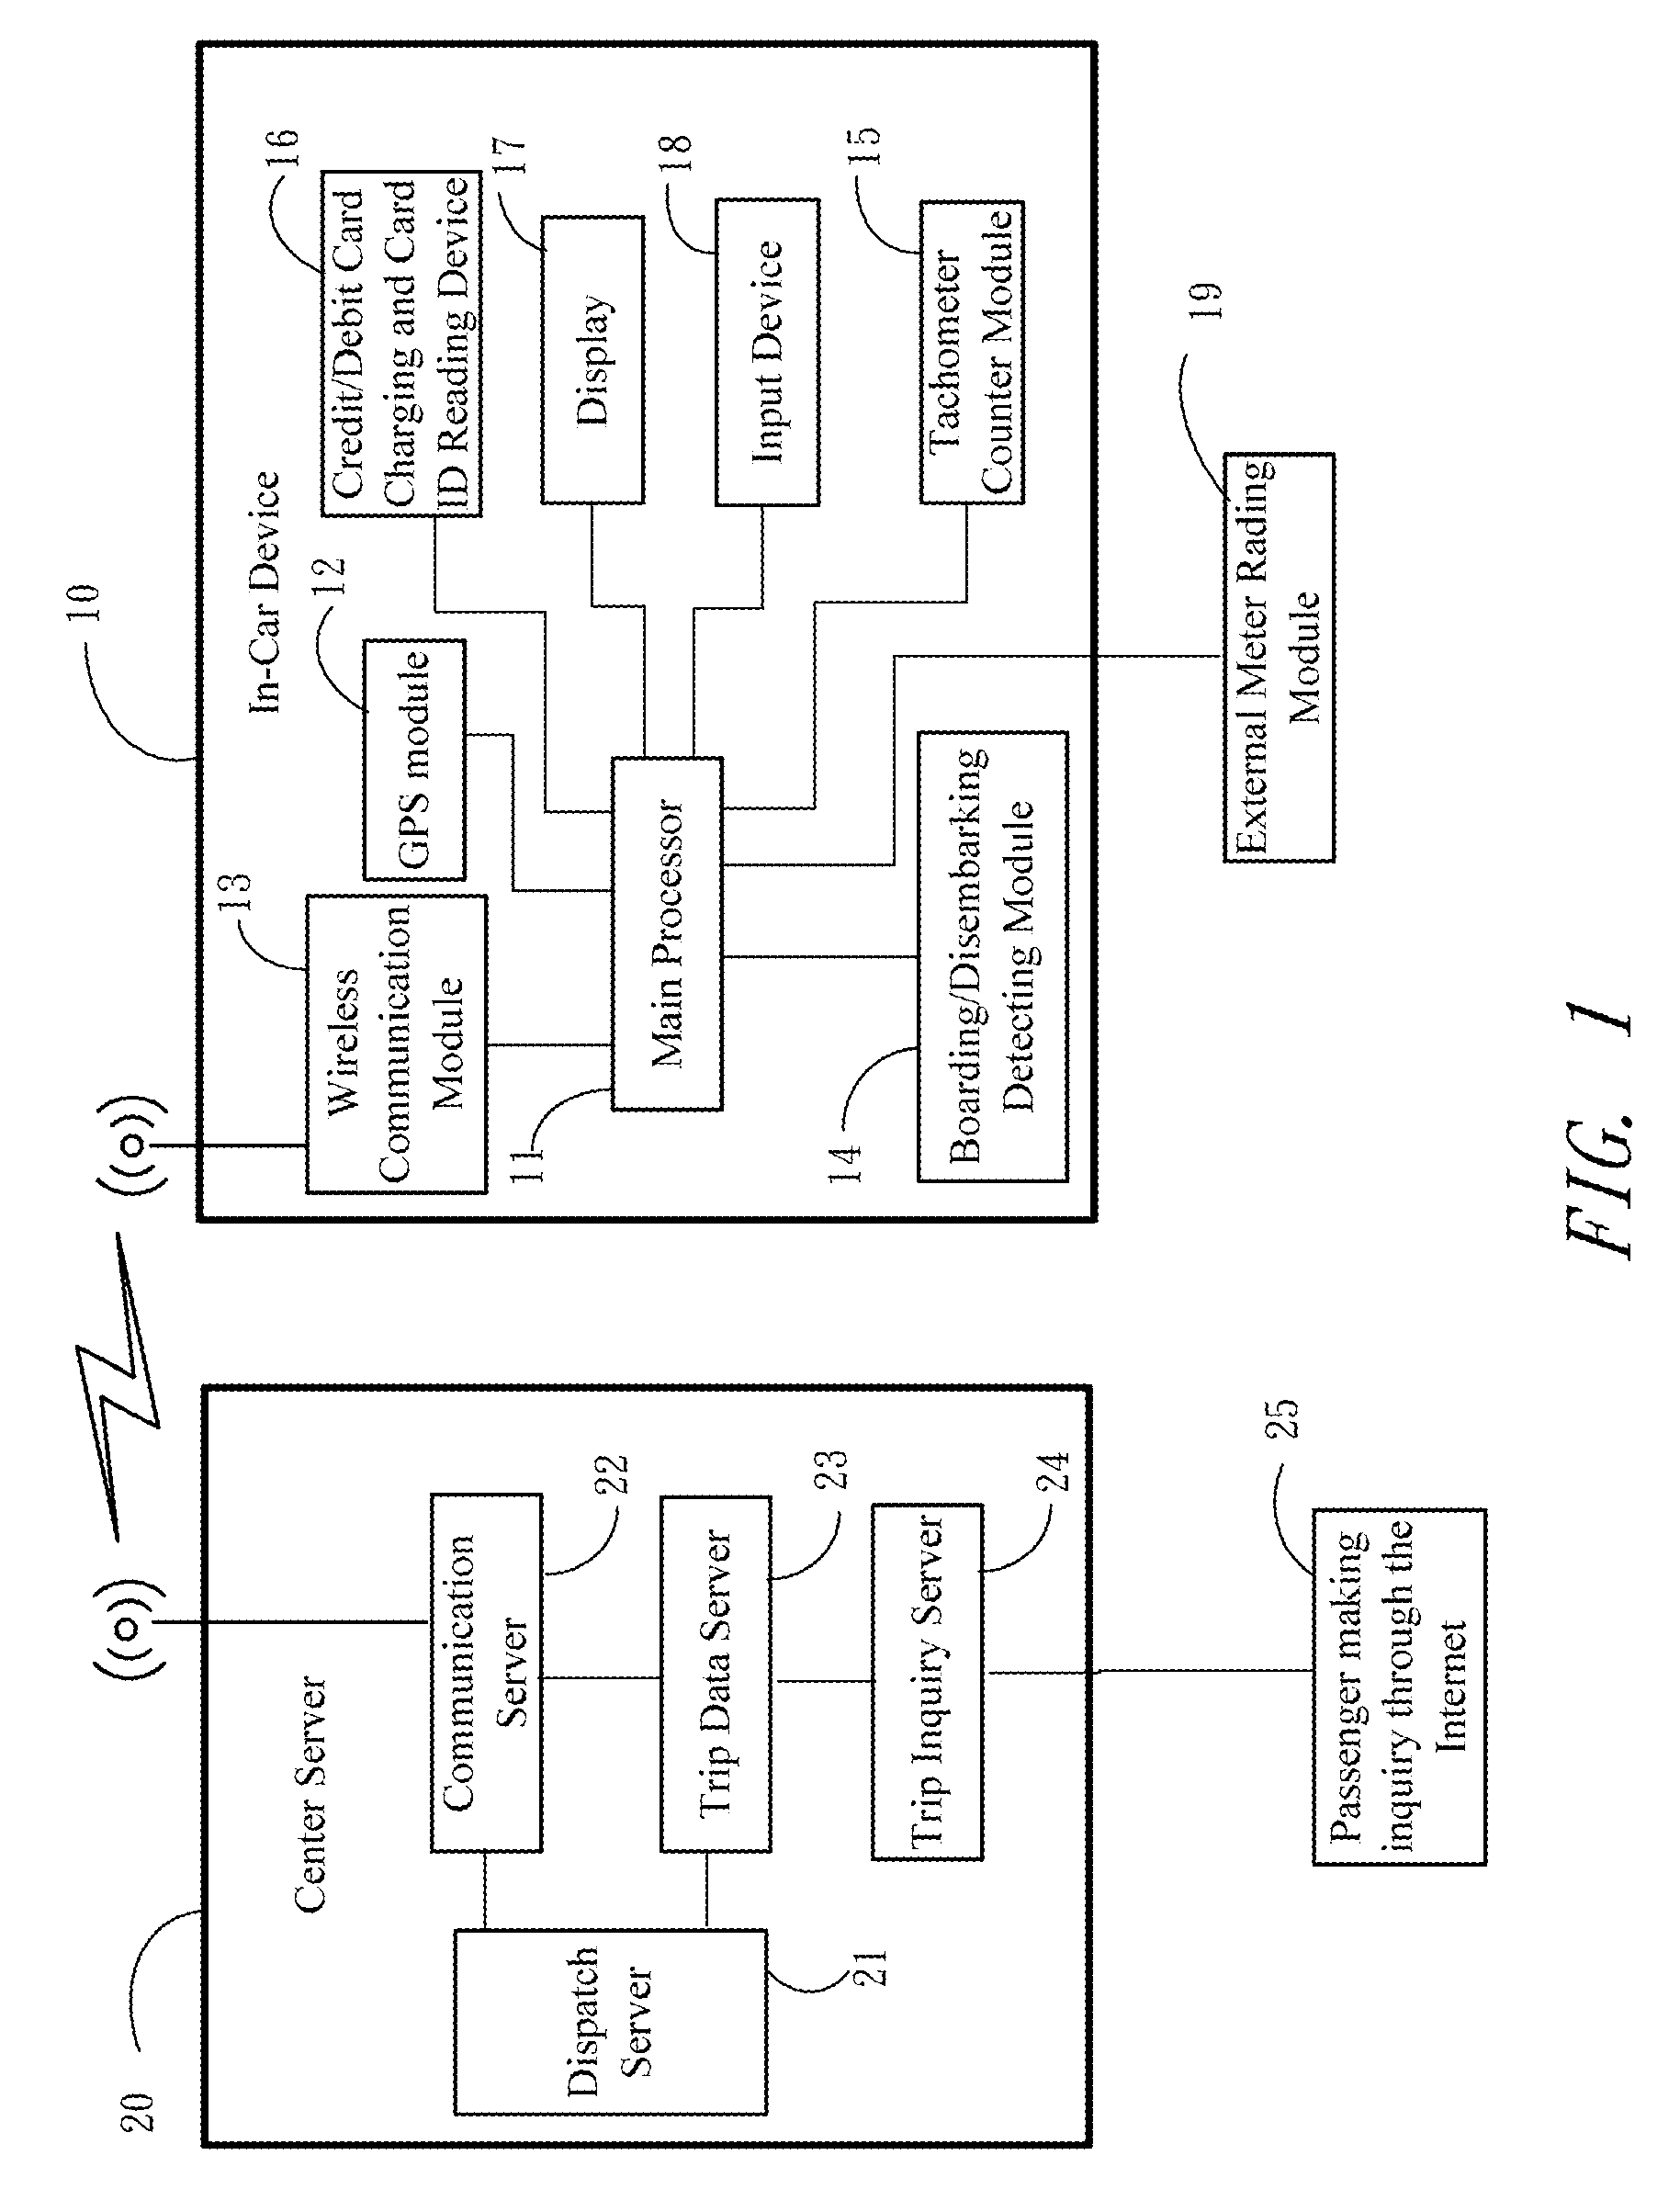 Automatic Electronic Trip Receipt System and Method for Chauffeured Vehicles